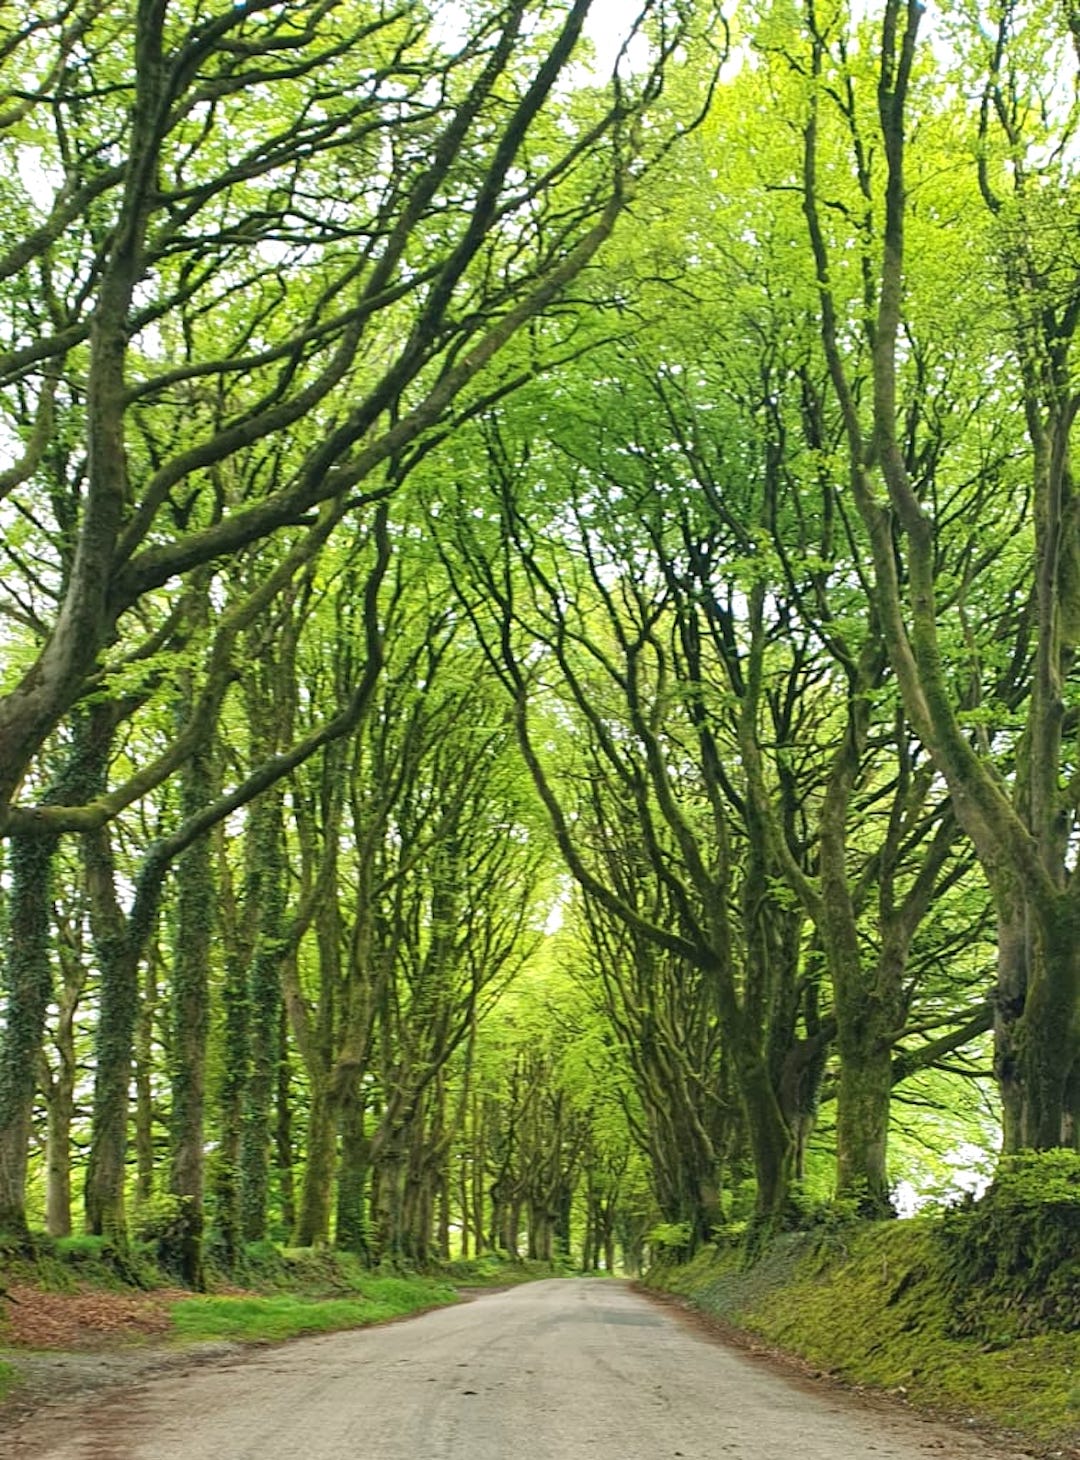 Avenue of Trees - We have a symbiotic relationship with trees. We exhale carbon dioxide which they take in, and in turn they give us the oxygen we breathe. They provide us with shelter, support, shade and food. It is our job to do all we can to protect them.